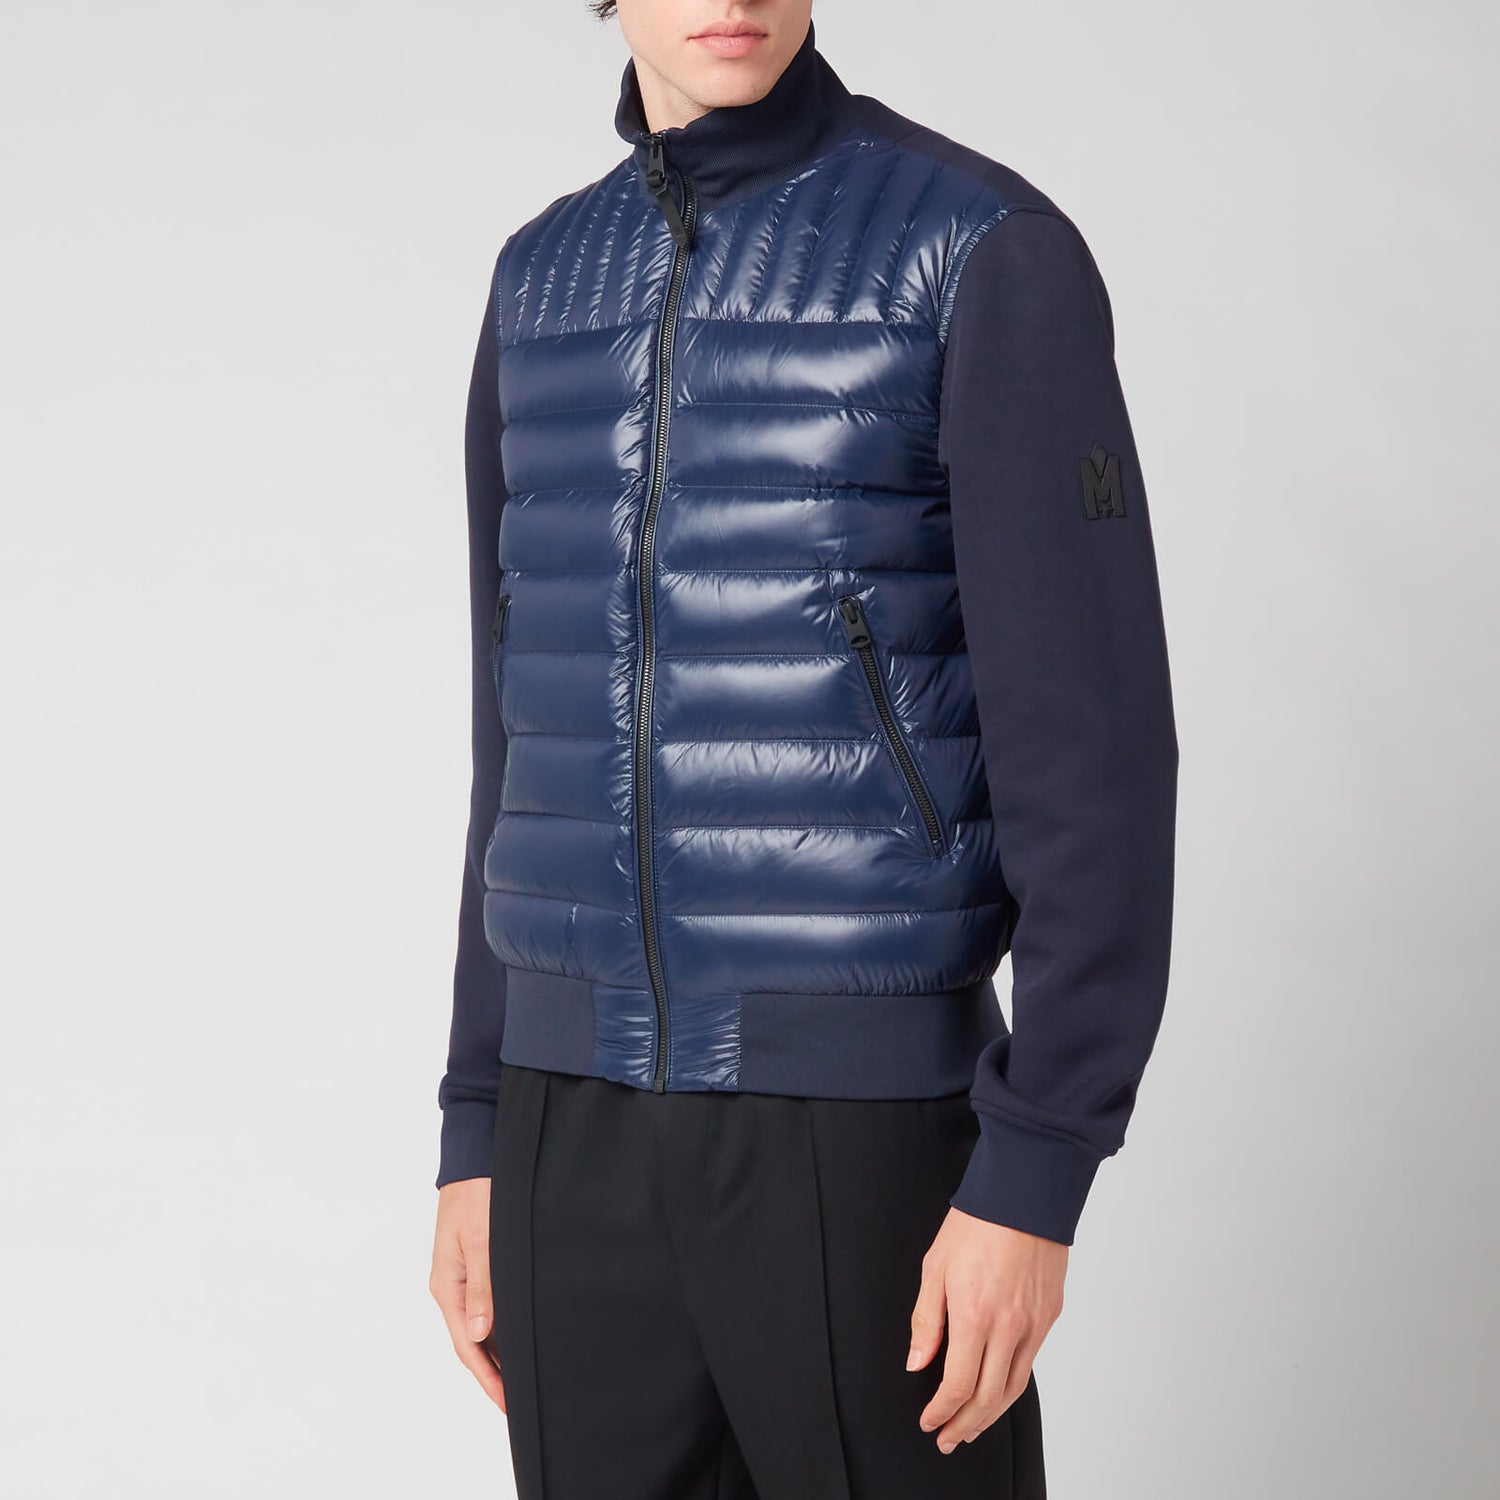 Mackage Men's Collin Bomber Jacket With Quilted Down Front Body - Navy - S